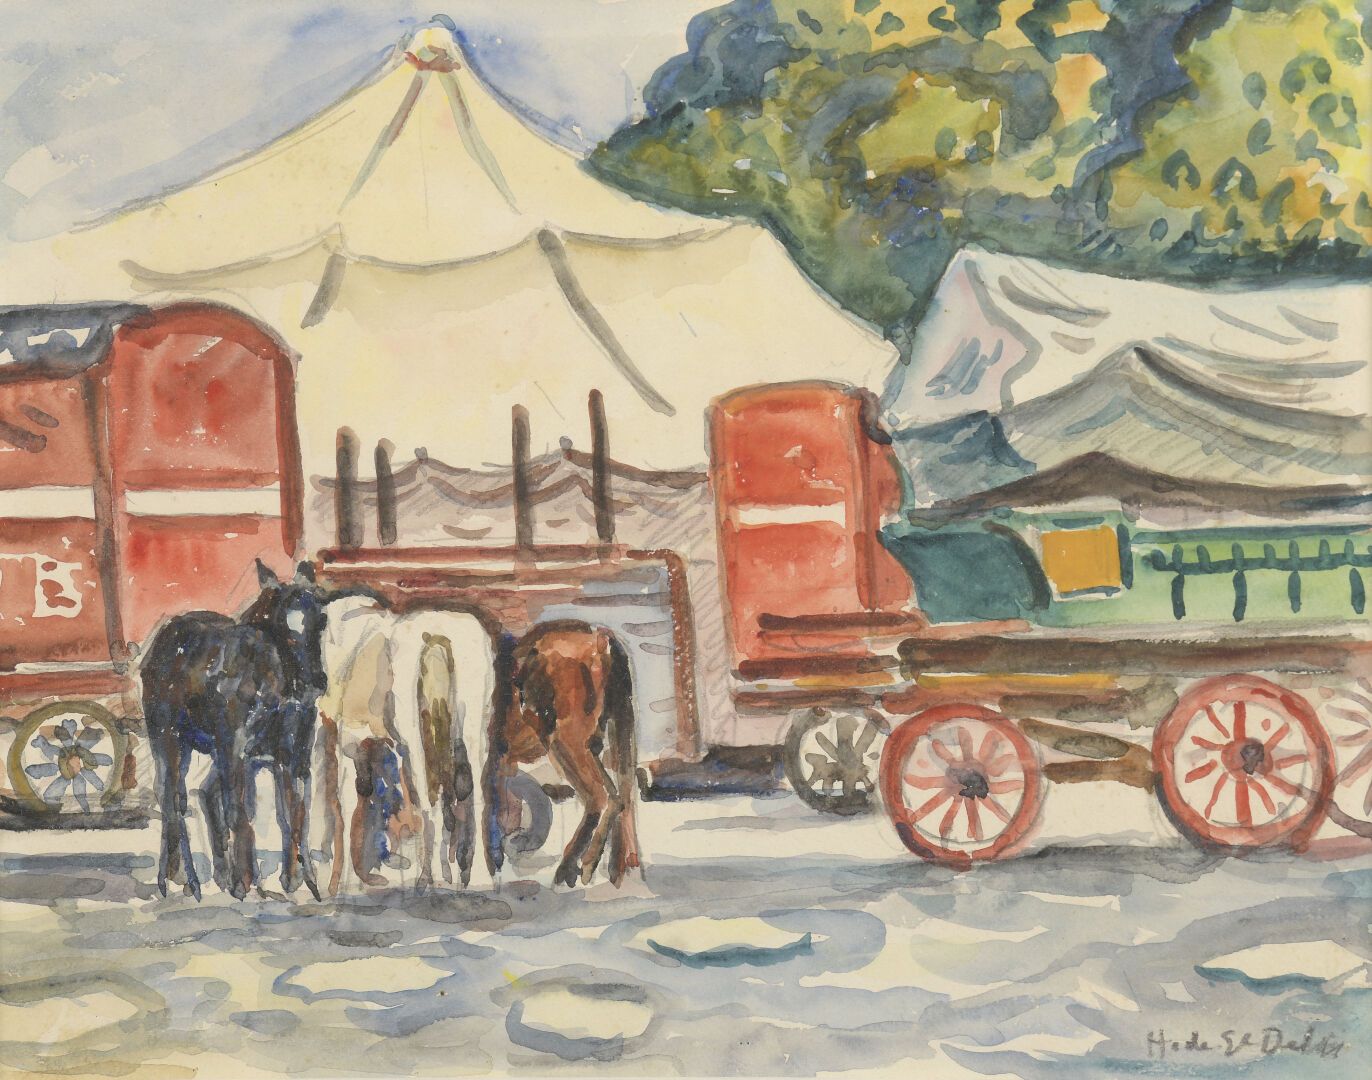 Null Henri de SAINT-DELIS (1878-1949)

The circus

Watercolor signed lower right&hellip;